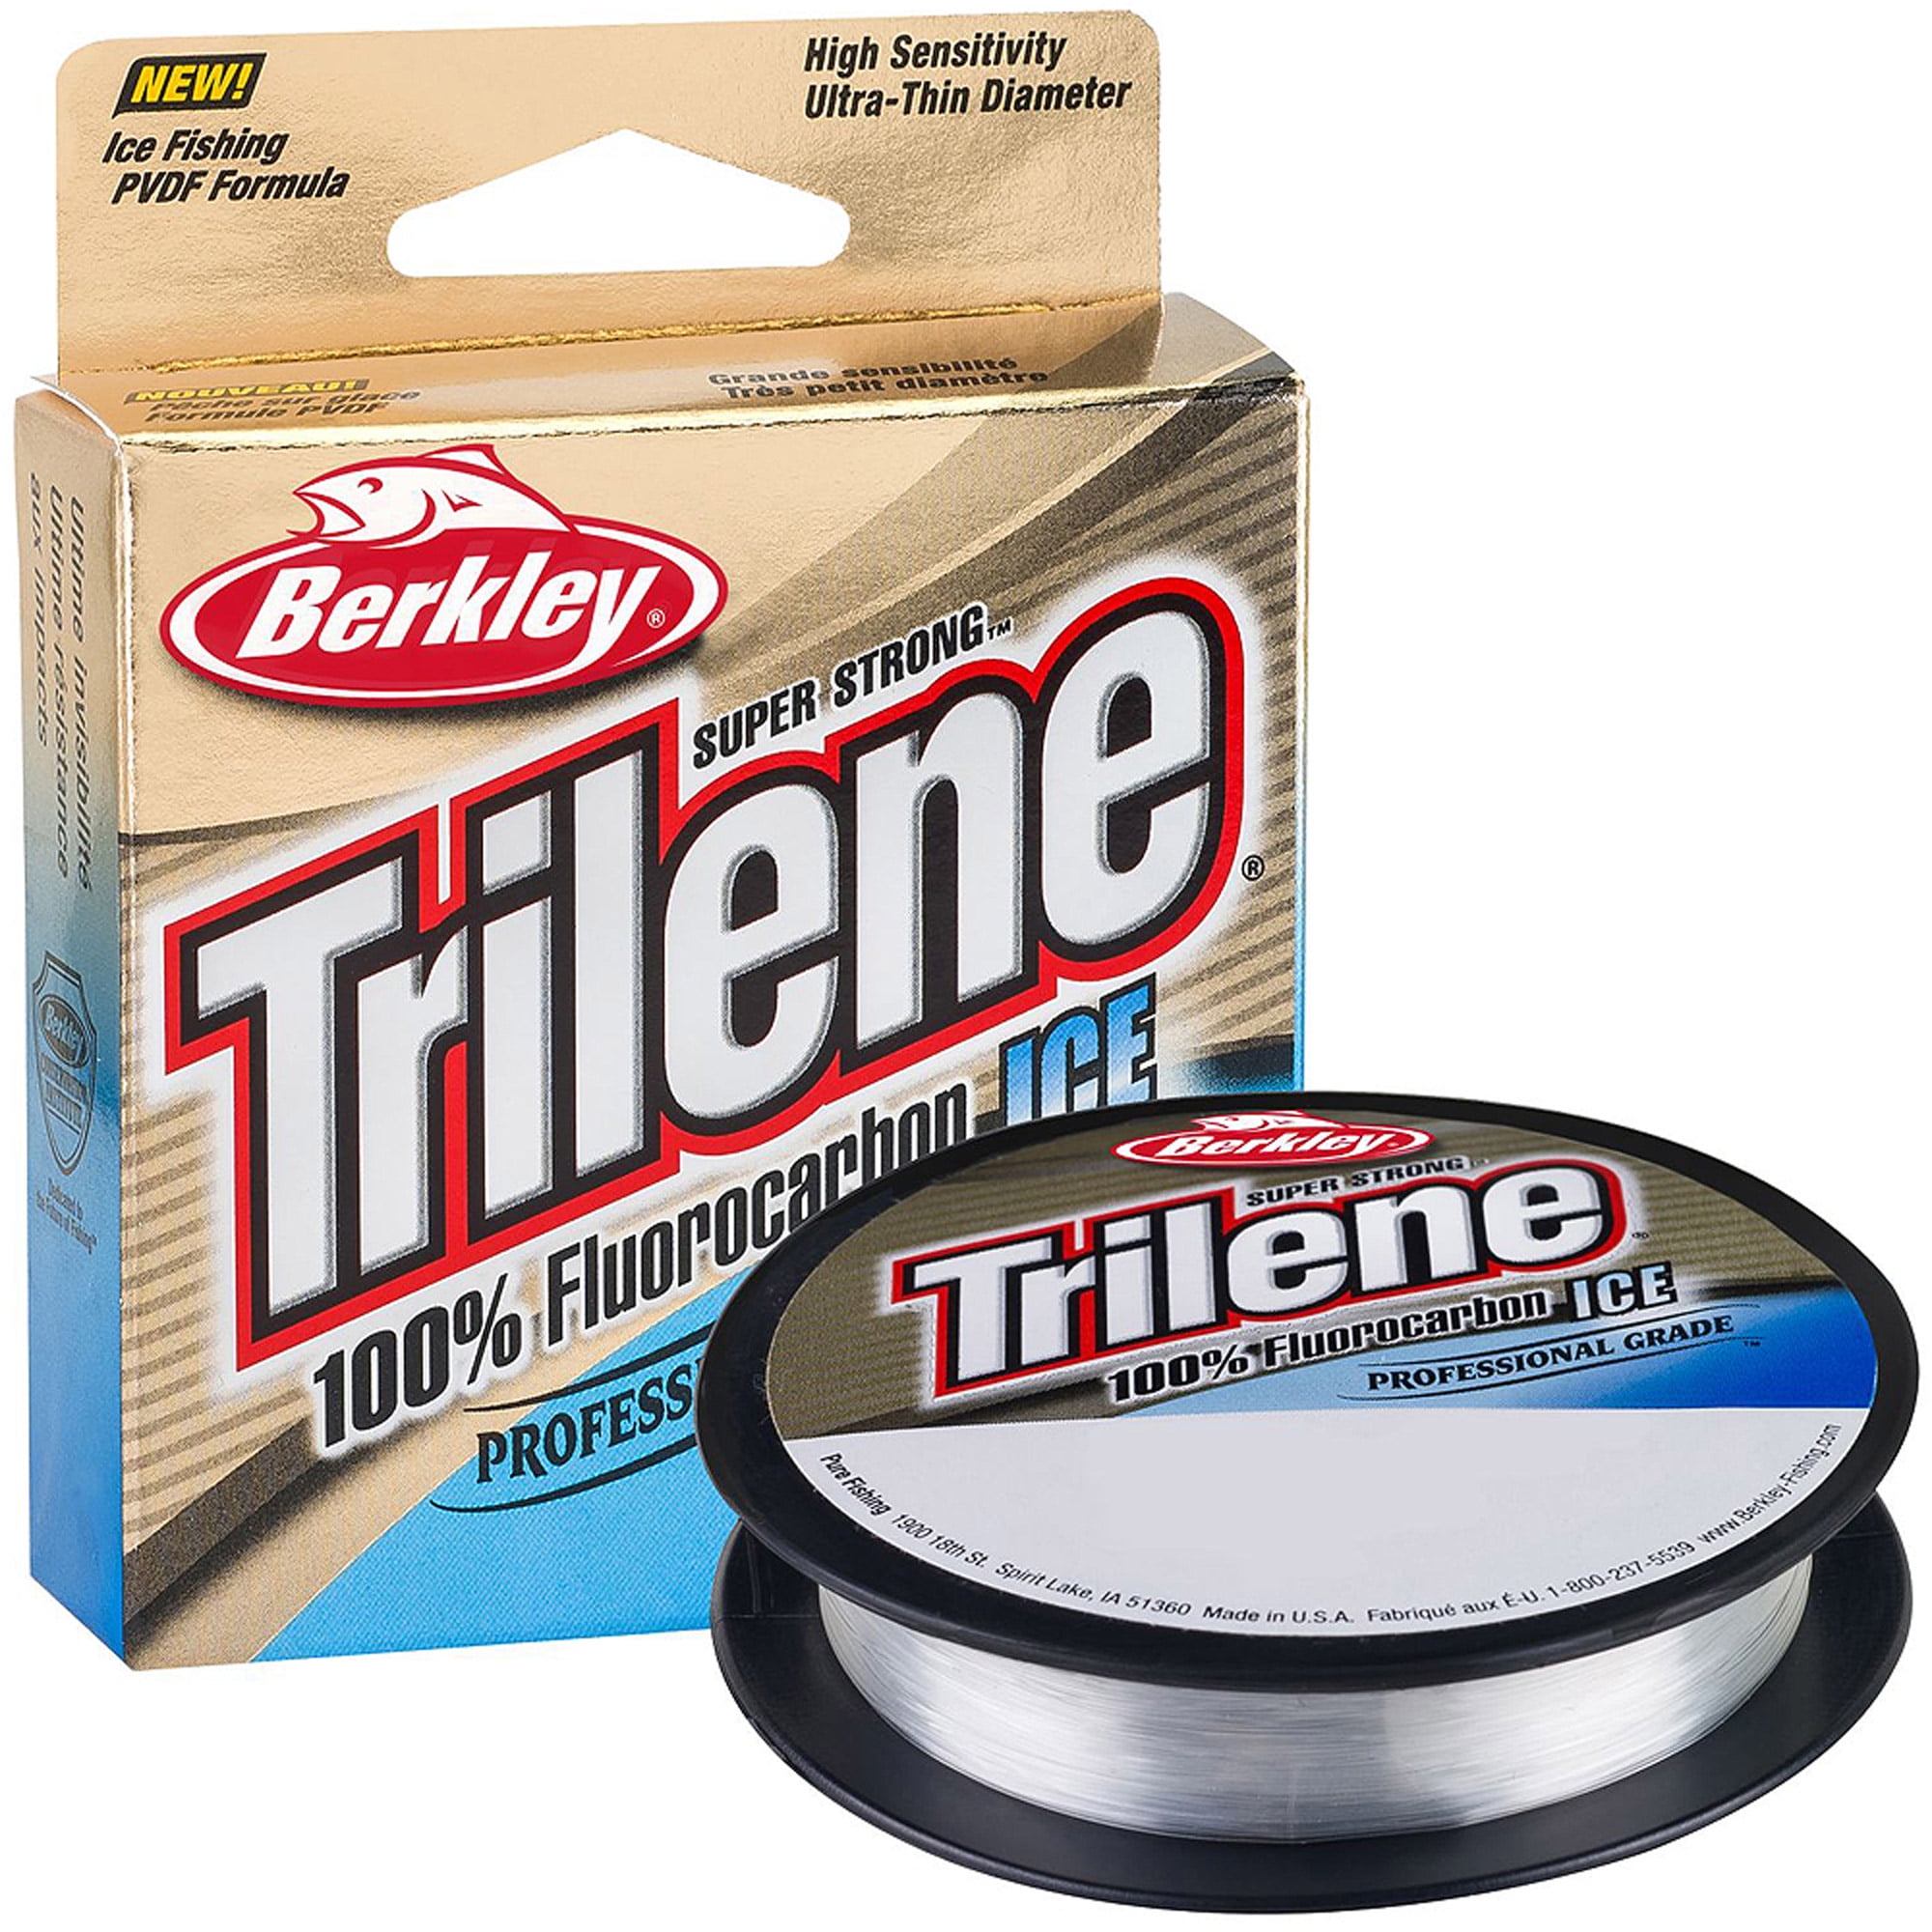 100% Fluorocarbon Invisible Fishing Leader Line 100Lb/20M (1) - Buy Online  - 26395334